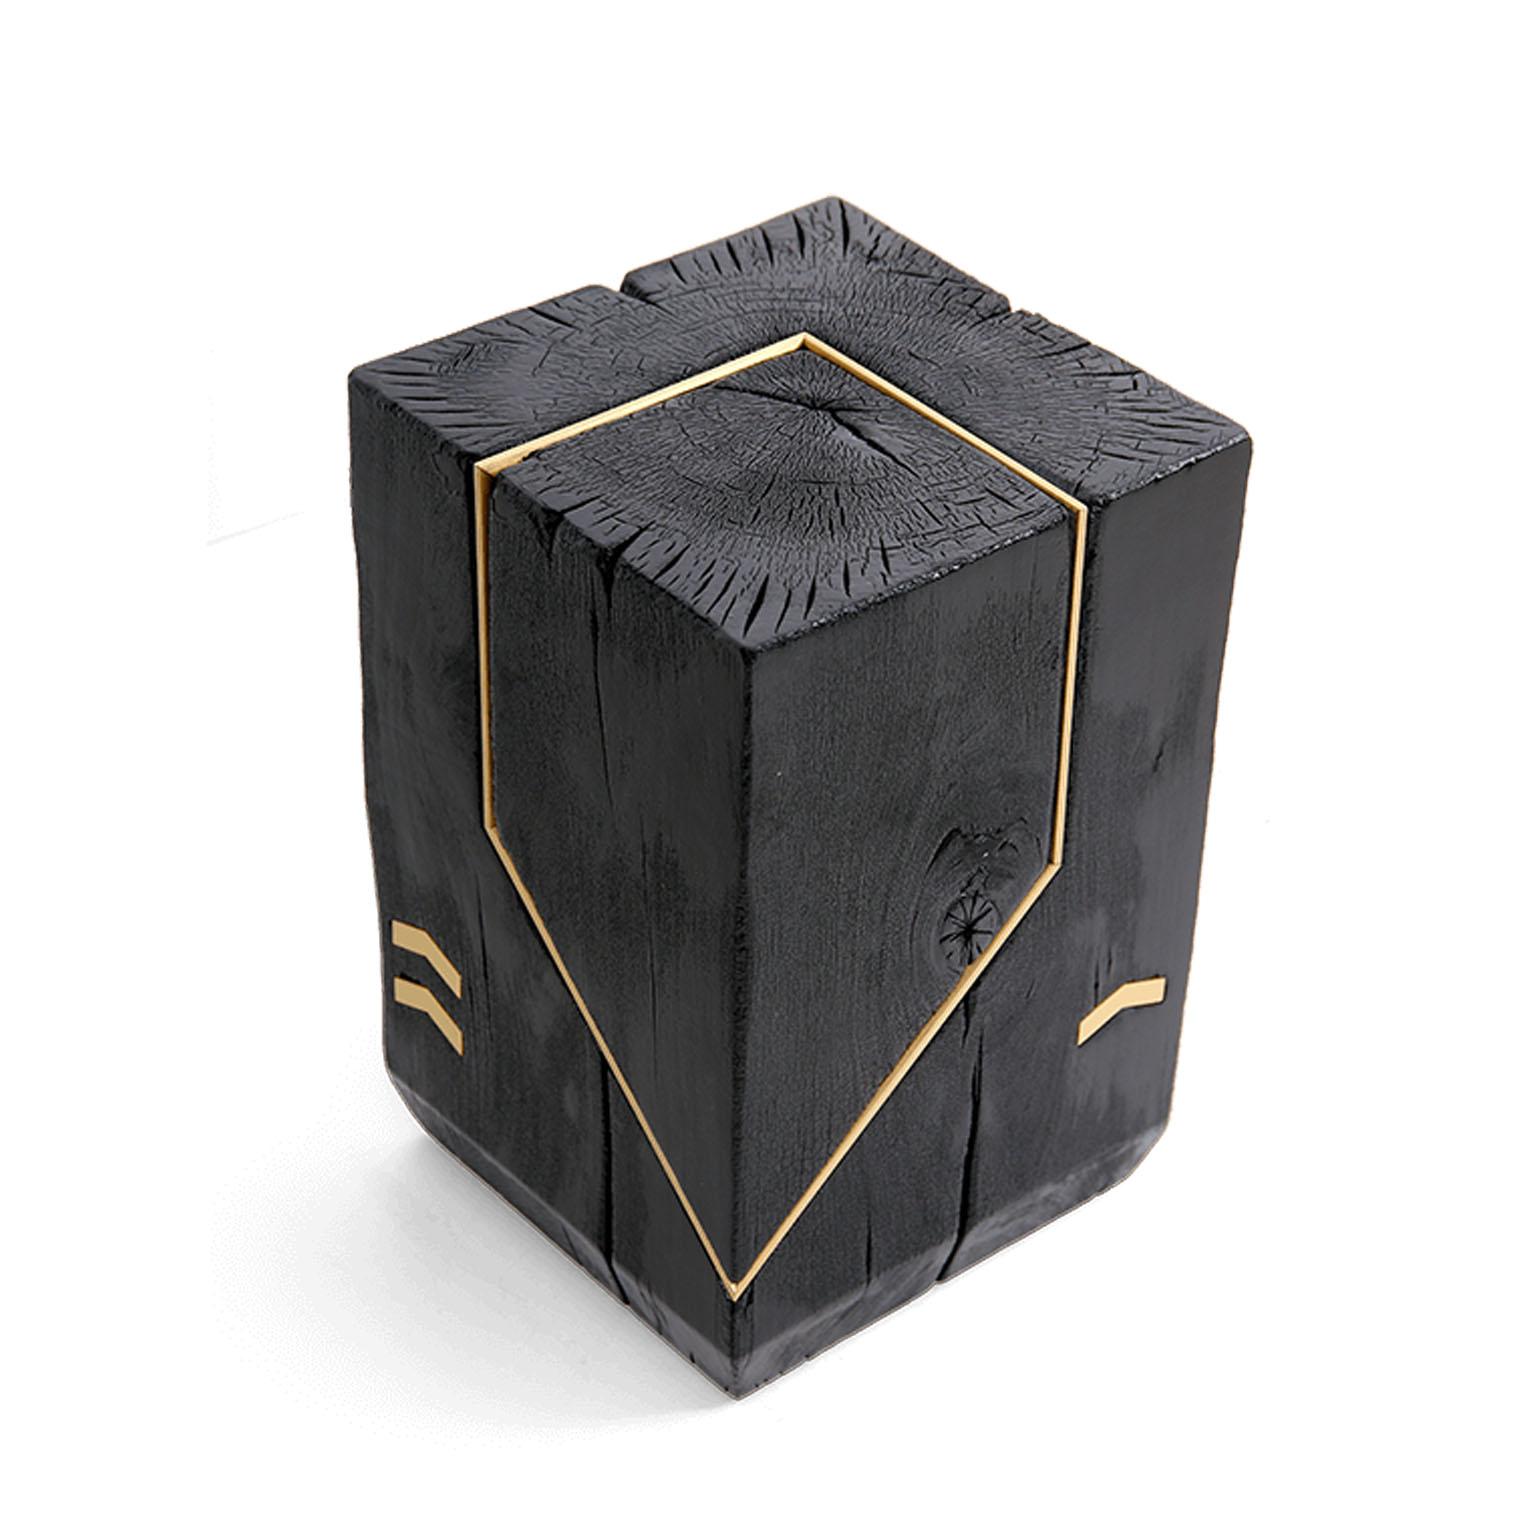 The Kanagawa Charred Timber side table brings nature into your home. It is a simple cube side table with a strong impact. Made from solid hardwood, and retaining the natural live edge of the tree, each piece of wood is hand-picked and absolutely